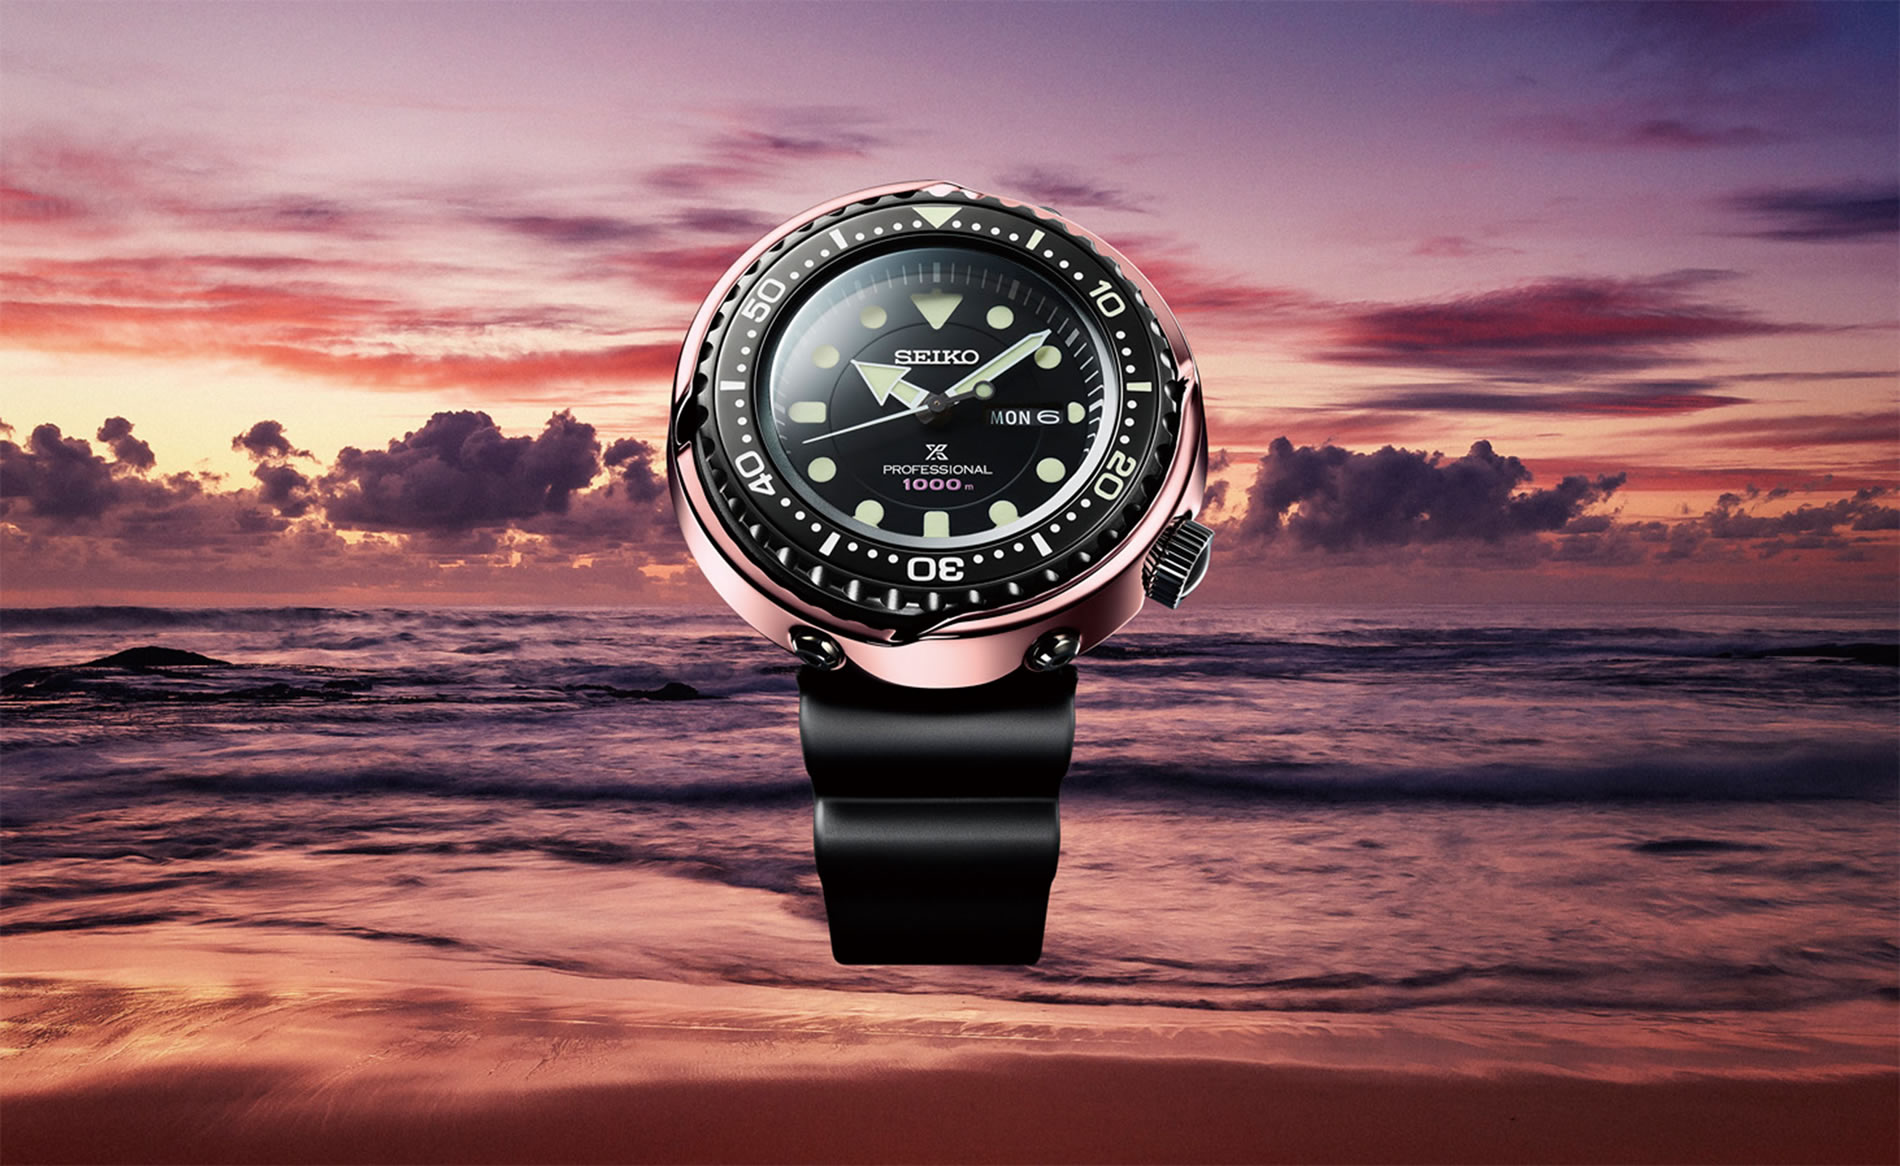 Seiko’s Expertise in Diver’s Watches is Celebrated in the New Prospex Collection